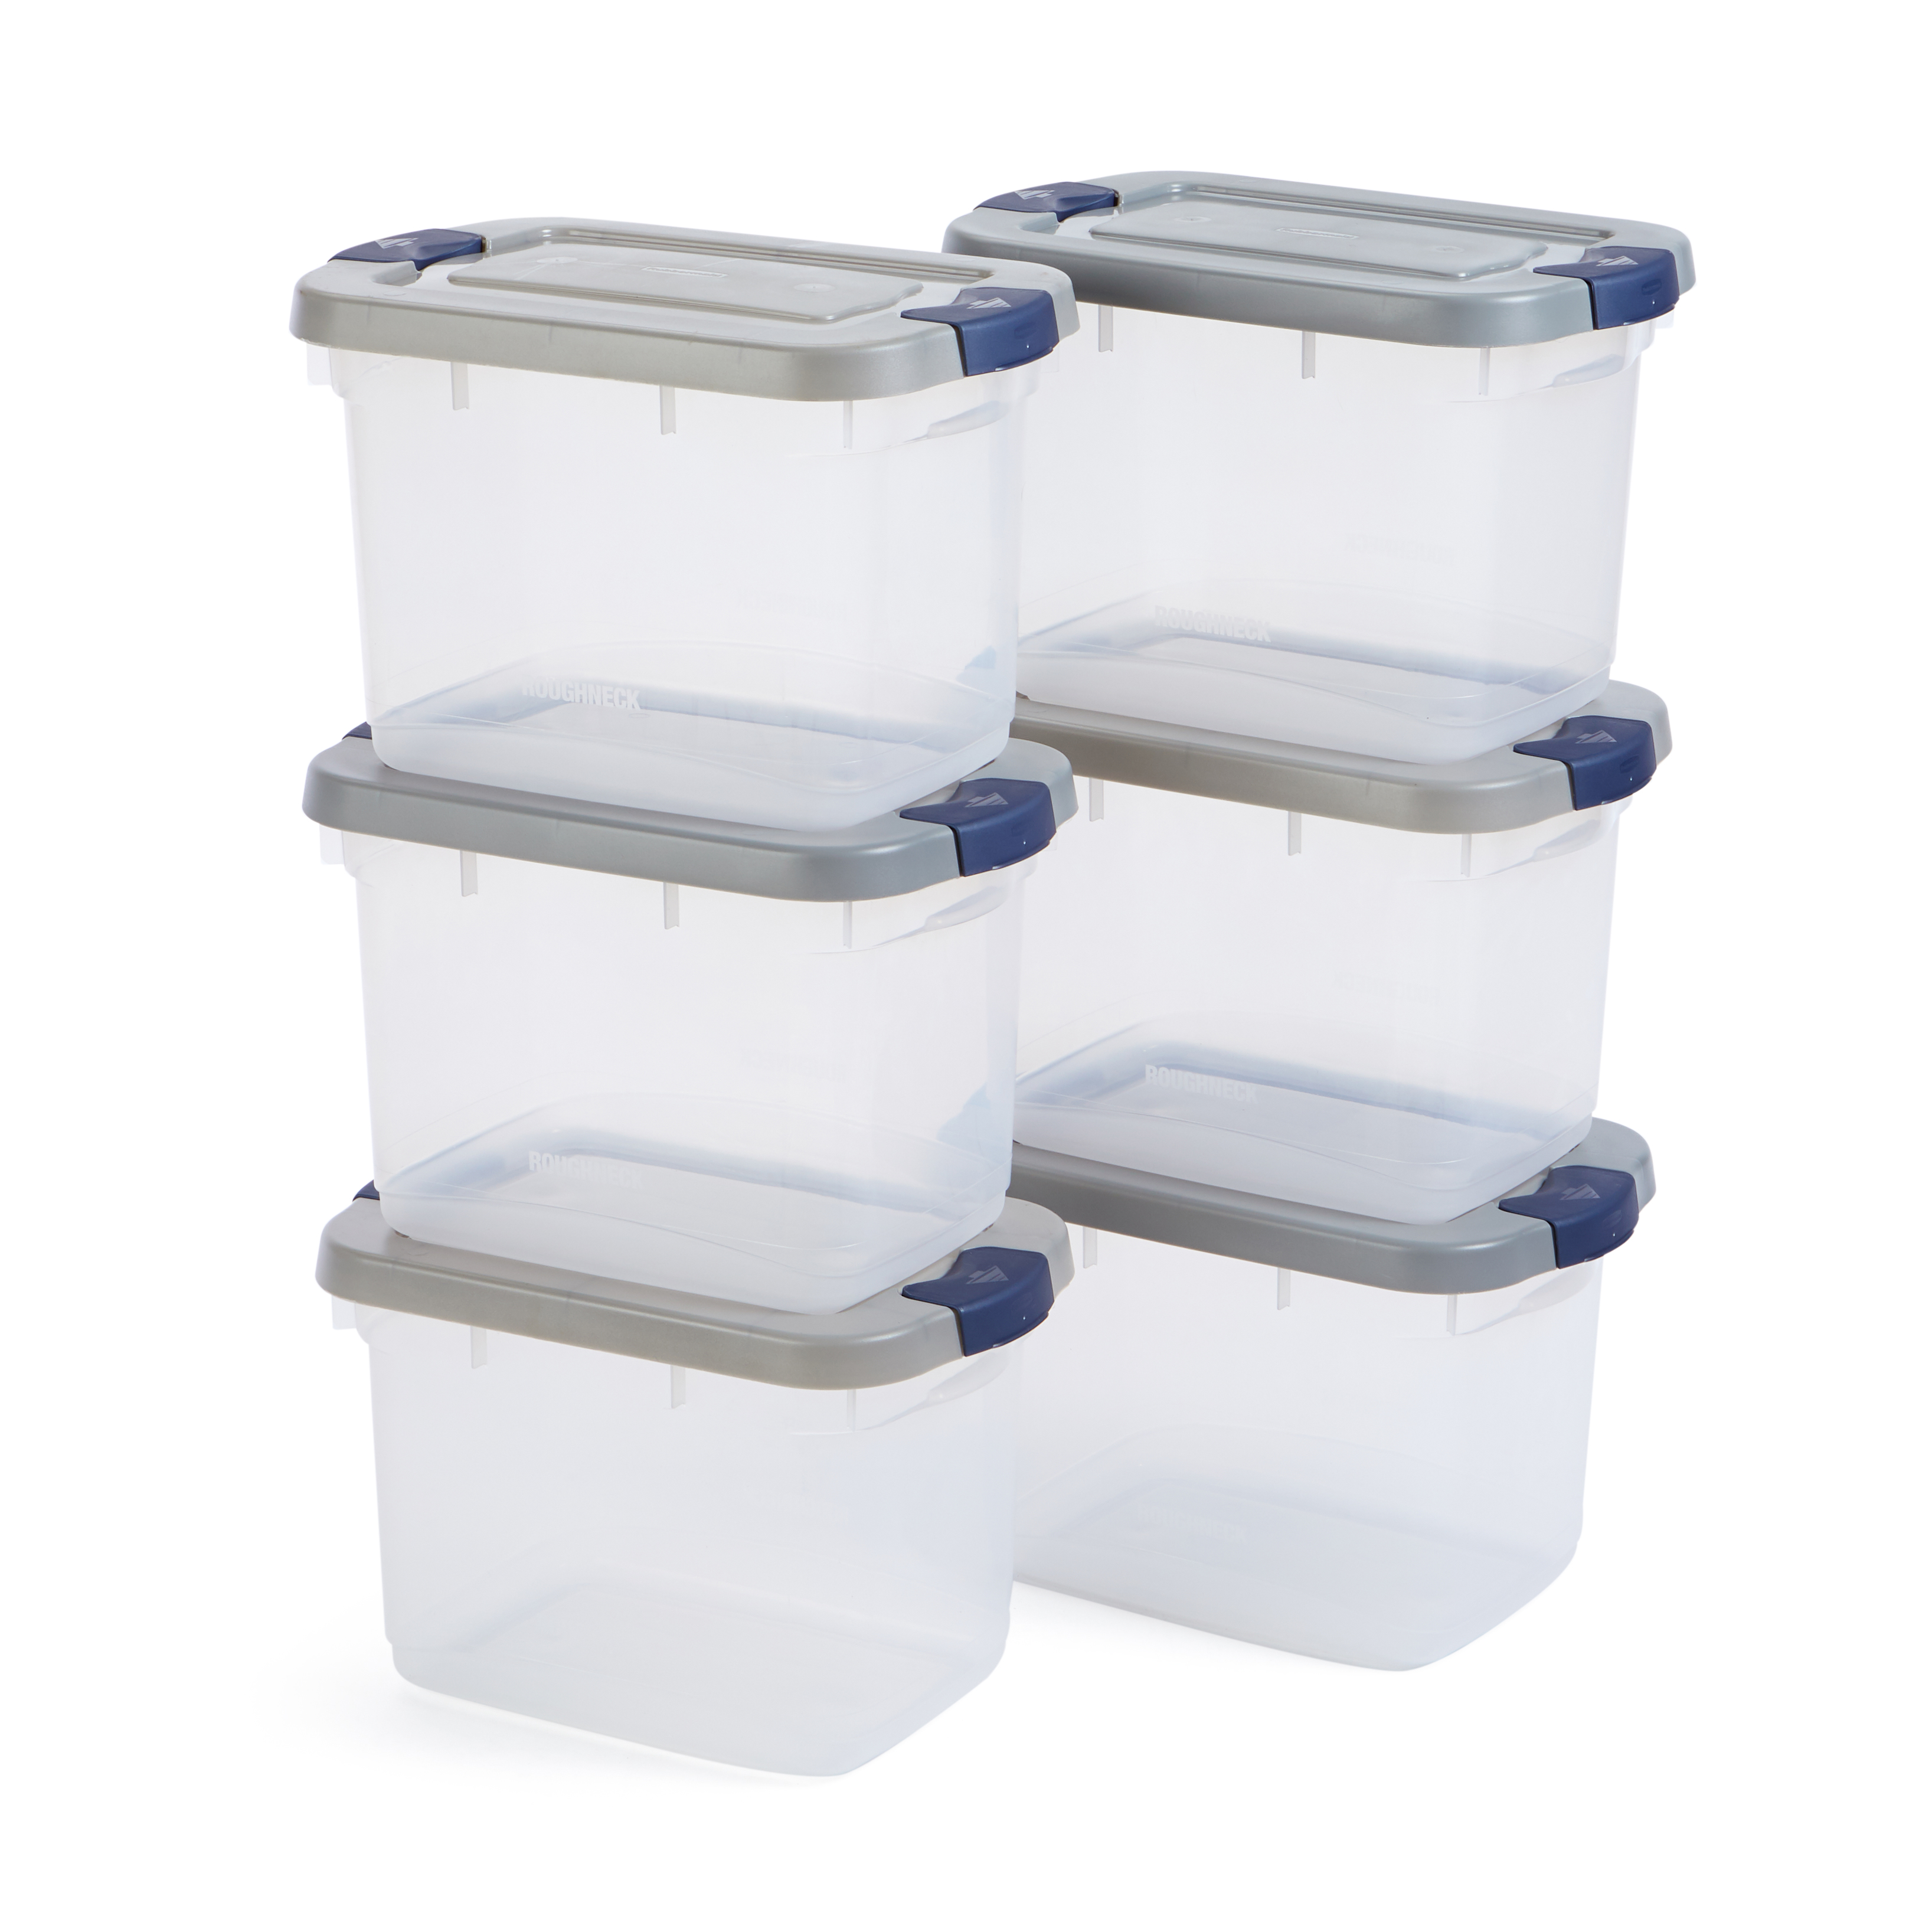 Rubbermaid Roughneck Clear 19 Qt. Plastic Storage Tote w/ Gray Lid, 6 Pack - image 1 of 7